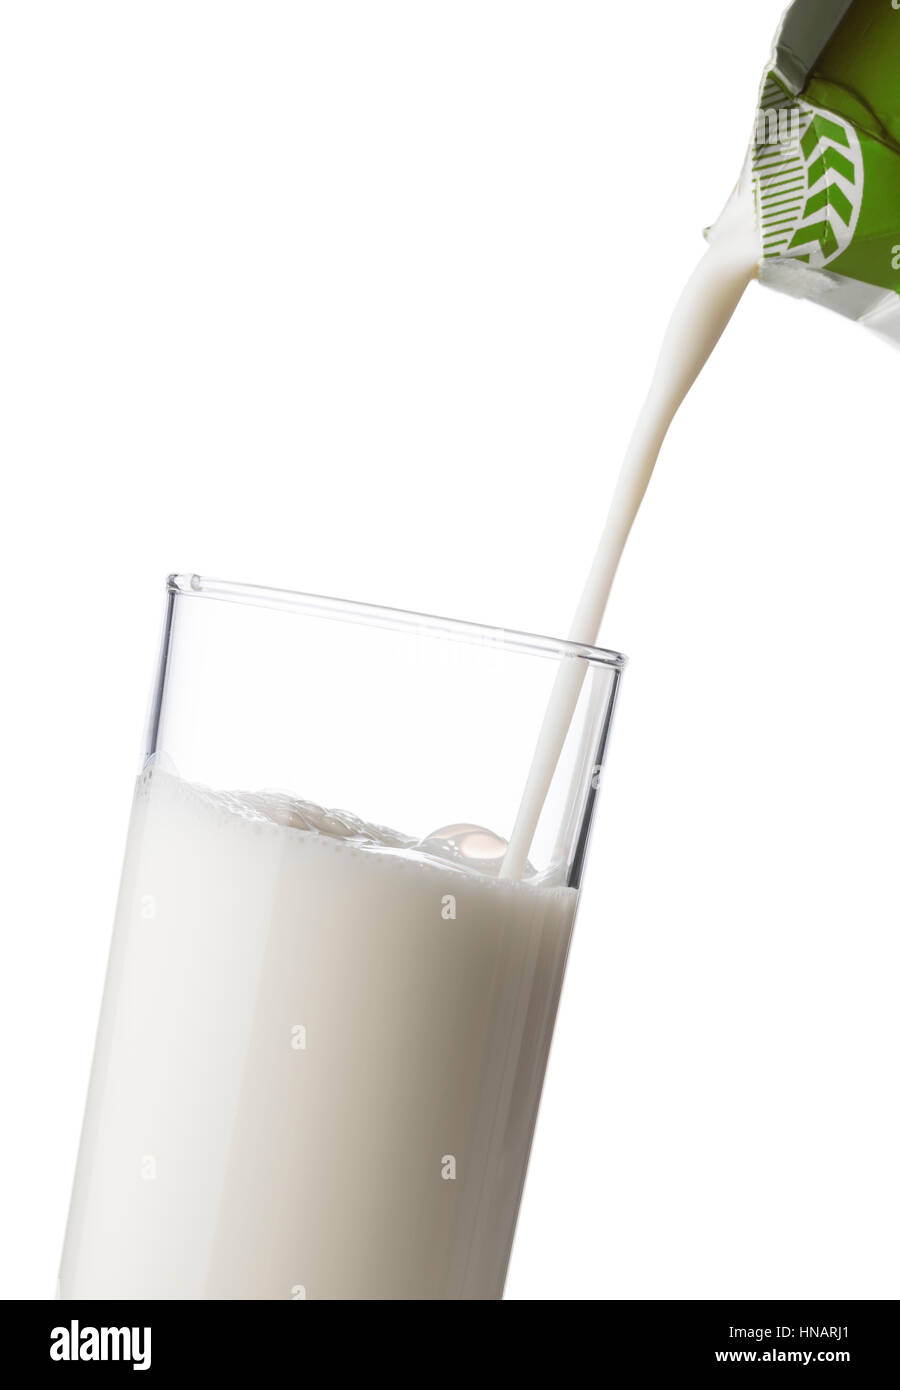 pouring milk into a glass from milk carton, on white background Stock Photo